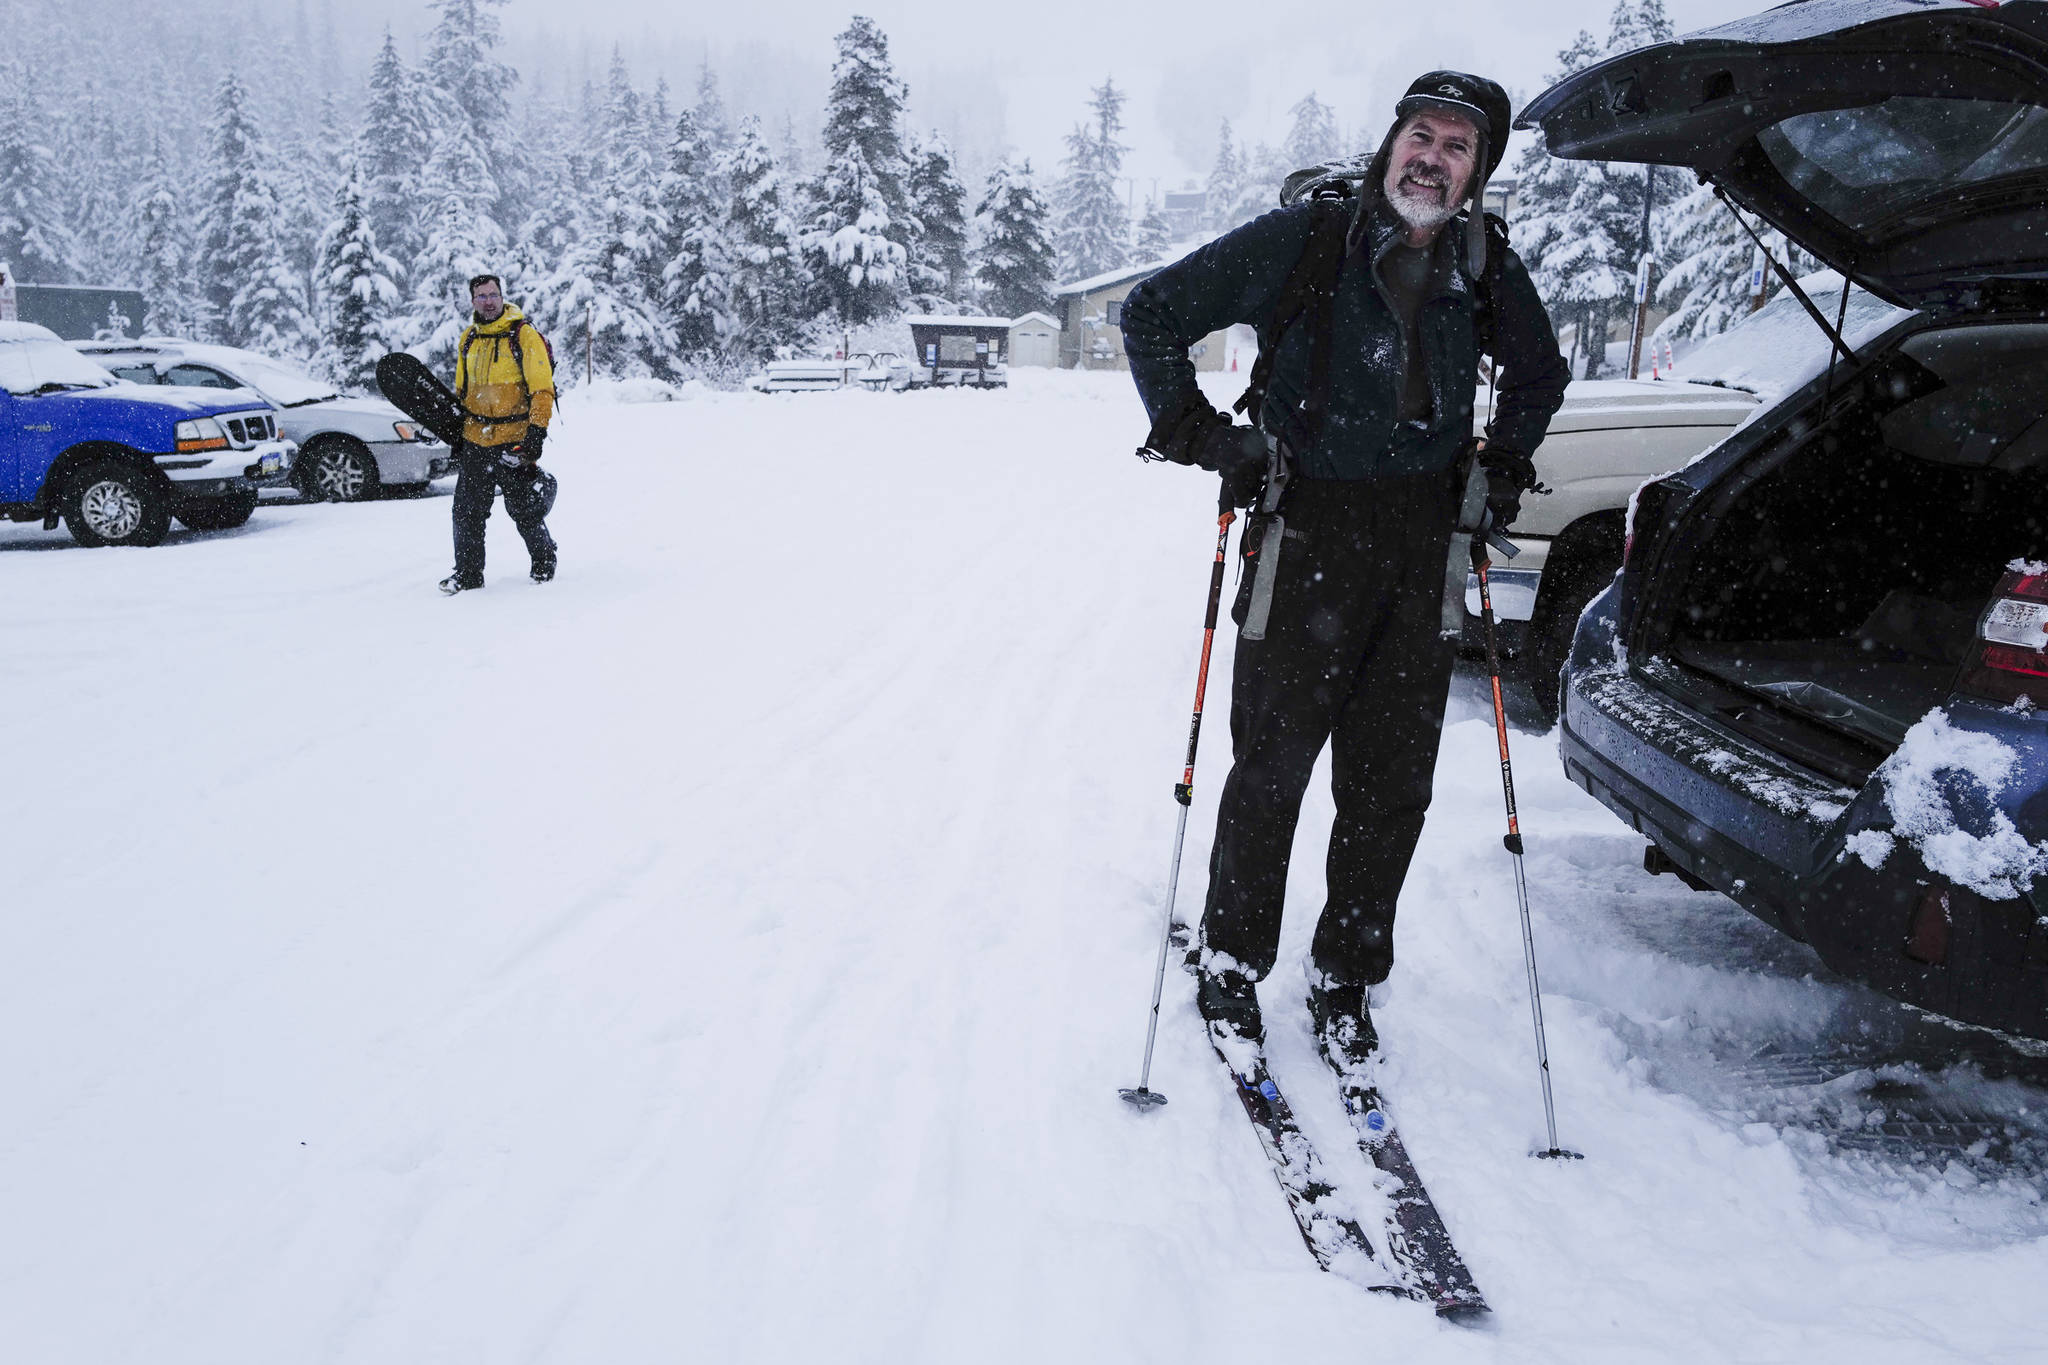 Eric Kueffner, right, and Wade Pancich return to their vehicles after taking advantage of fresh snow at Eaglecrest on Tuesday, Dec. 3, 2019. (Michael Penn | Juneau Empire)